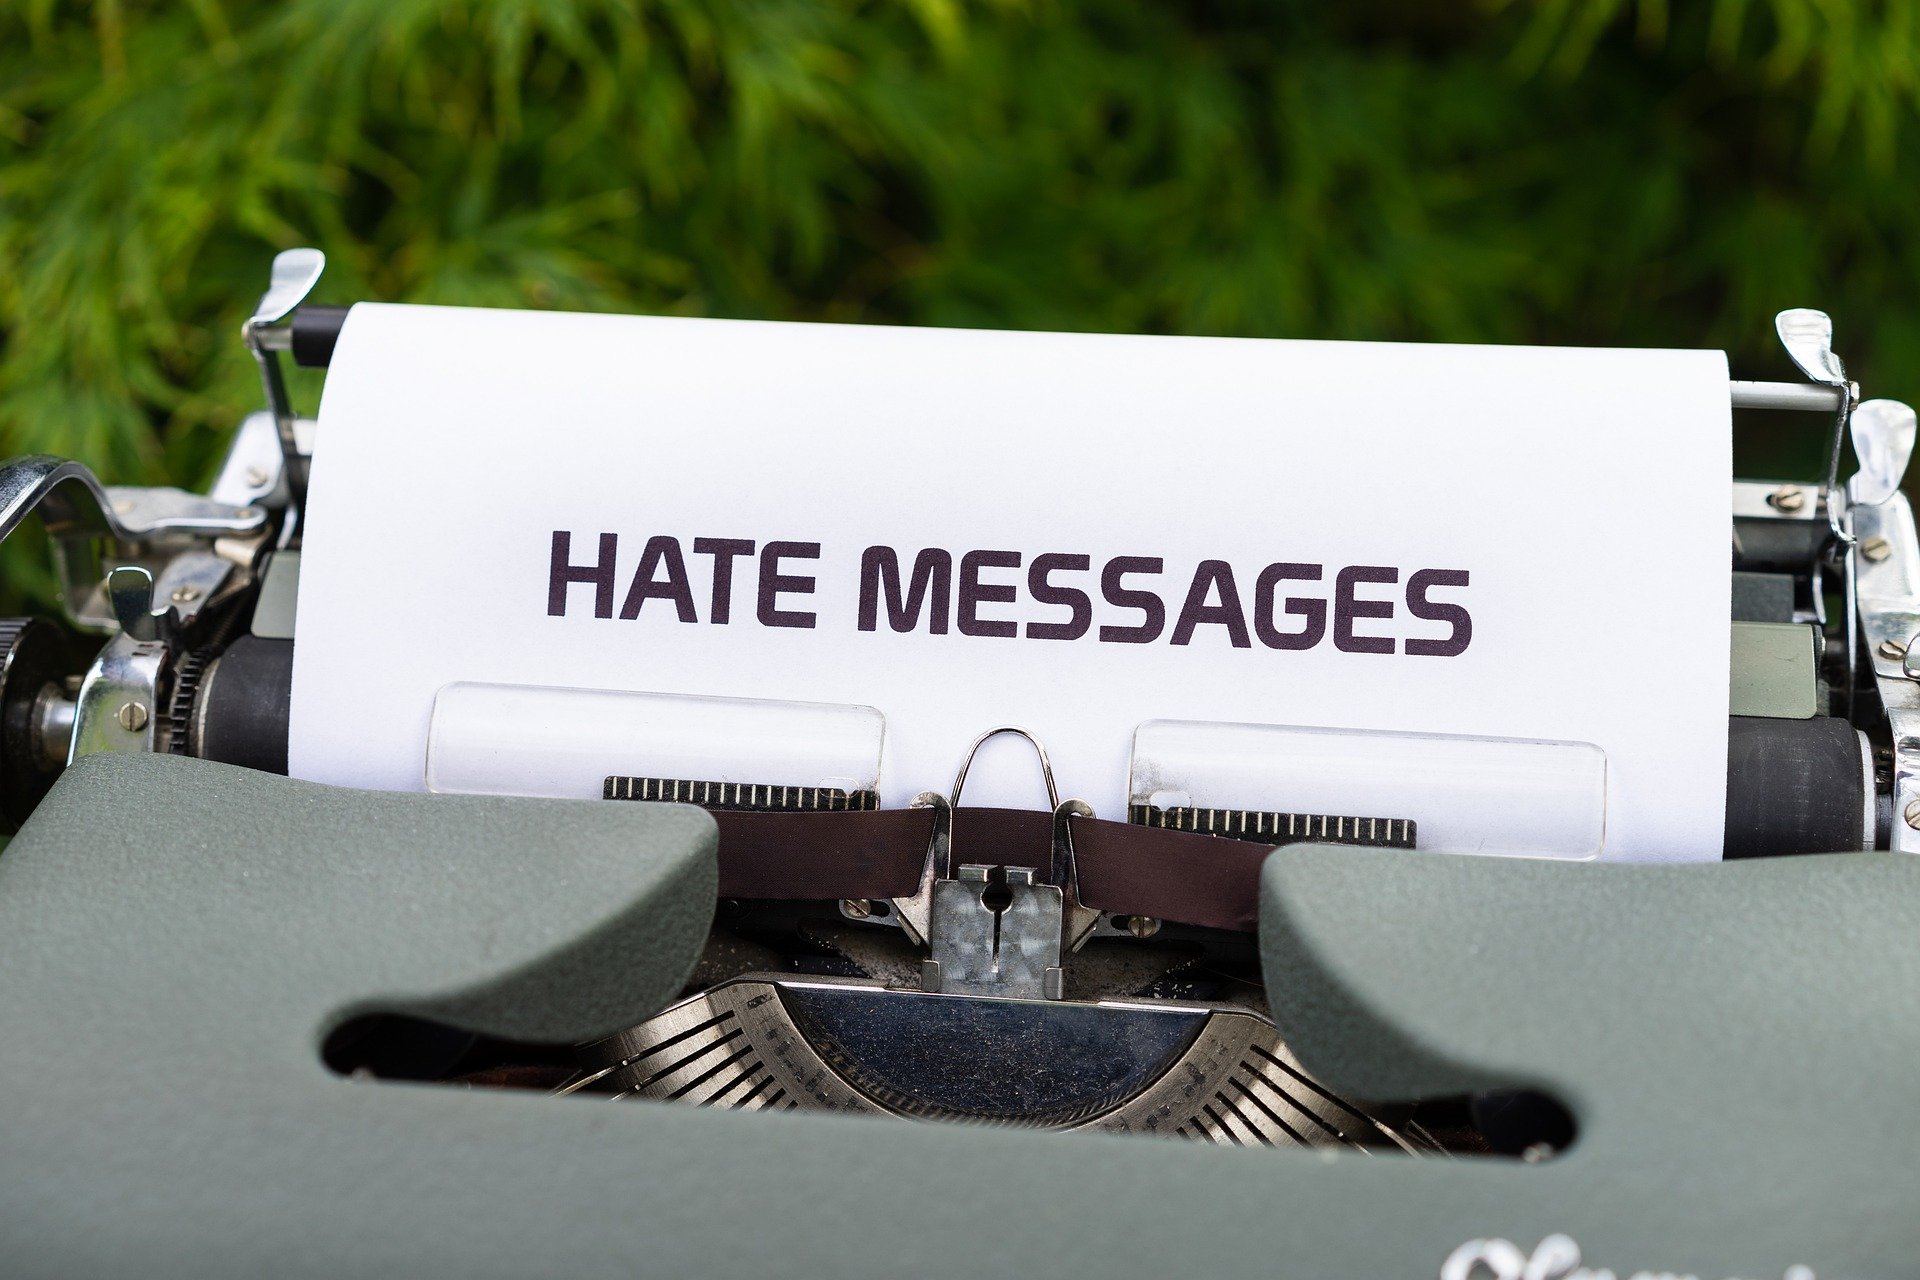 Pictured: A typewriter showing a document that reads: "Hate messages" referencing online cyberbullying | Source: Pixabay